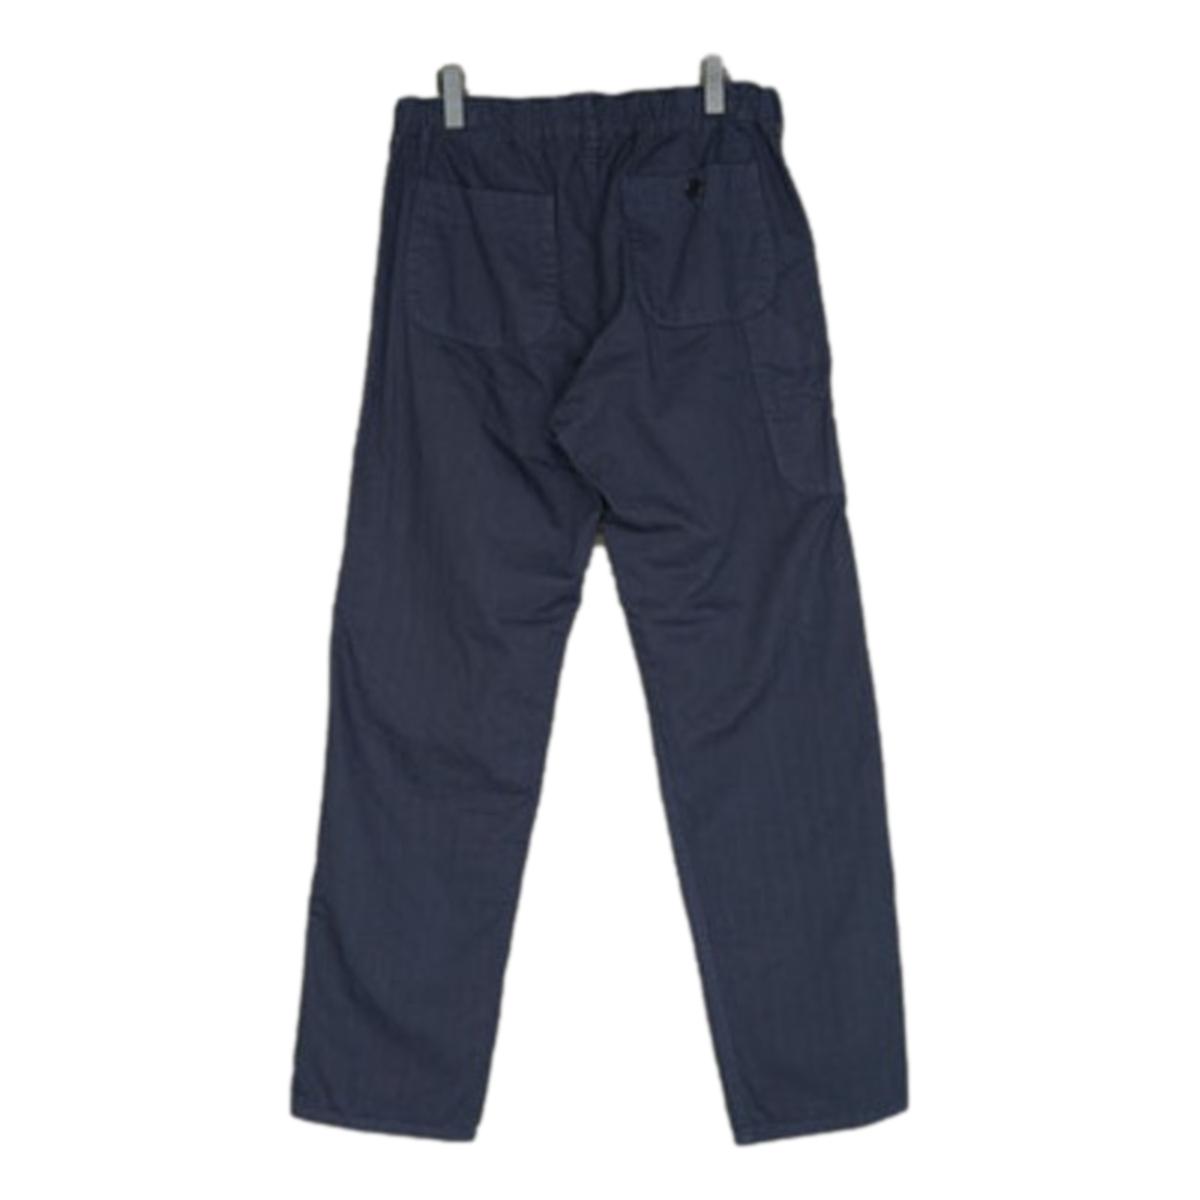 French Work Pants Navy - Pants